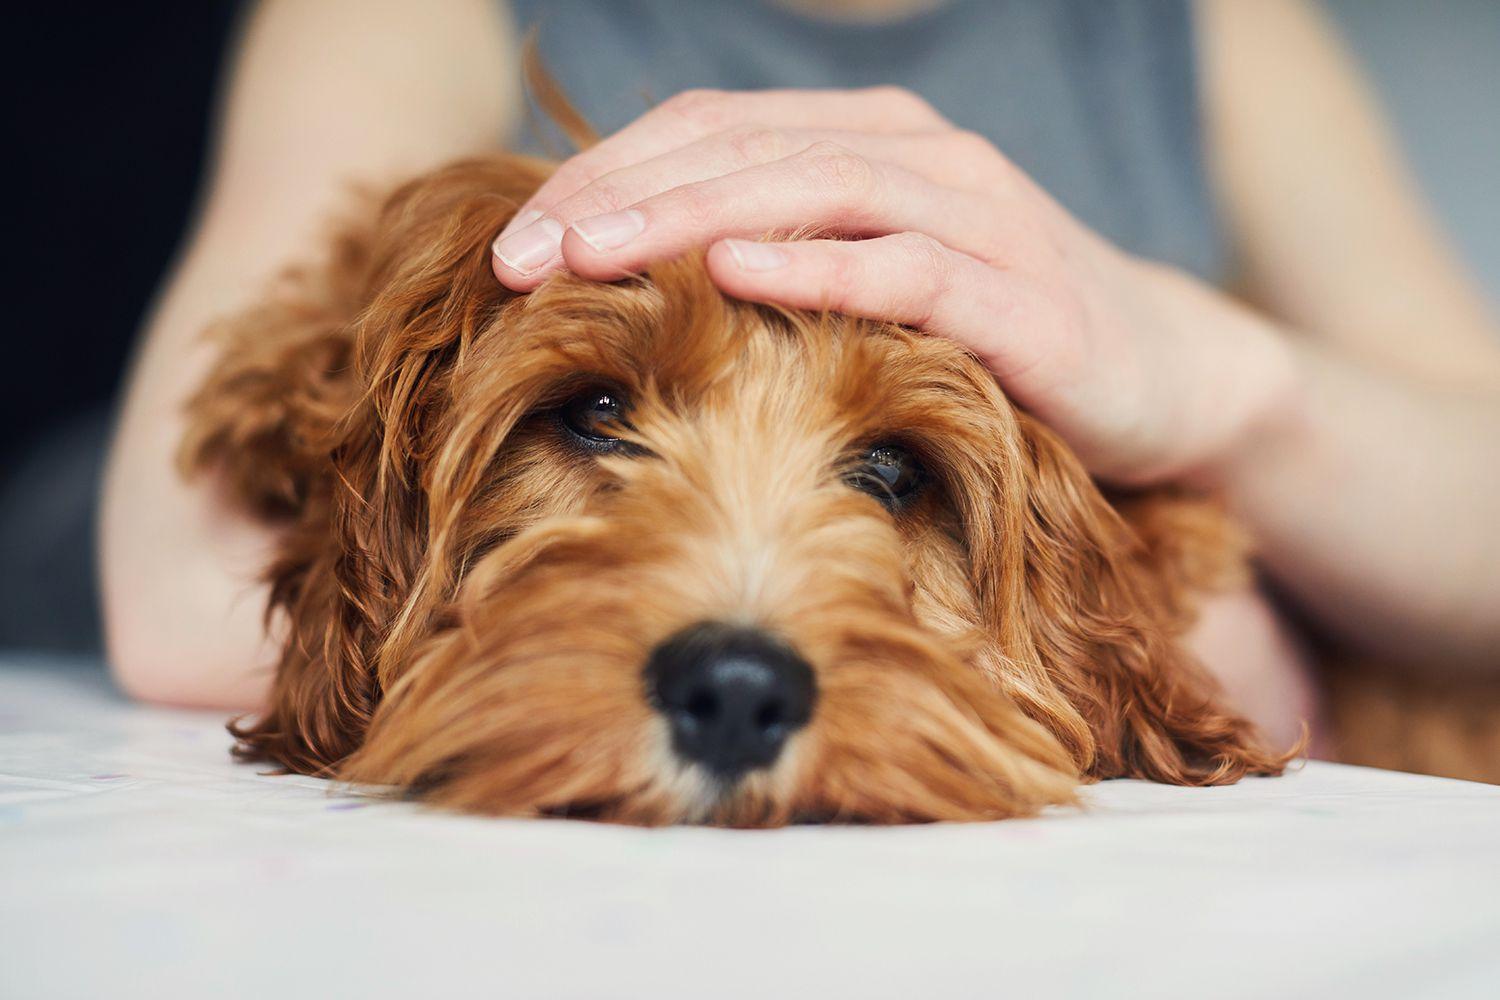 What to Do If Your Dog Has a Seizure